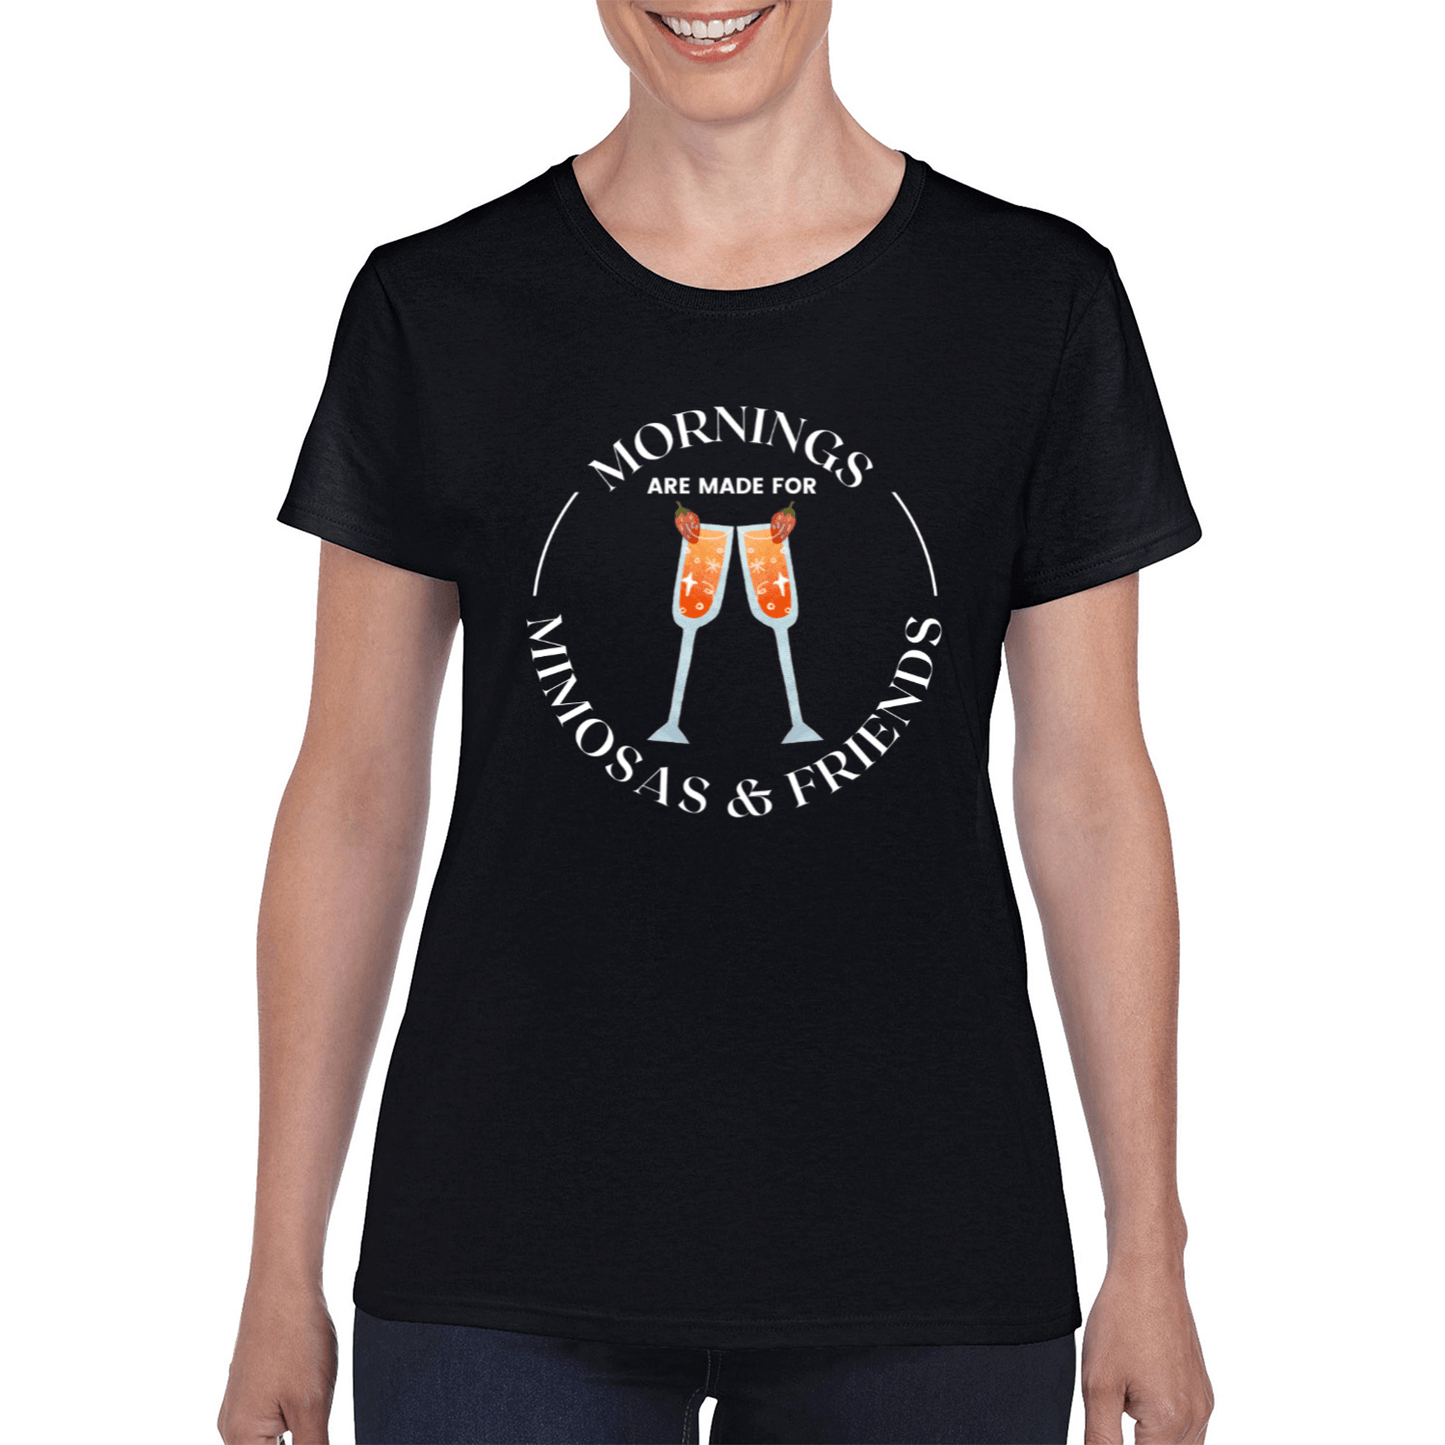 Mornings Are Made For Mimosas & Friends Graphic T-Shirt For Women, Ladies Funny Tshirt, Mimosa Lover Tee For Her